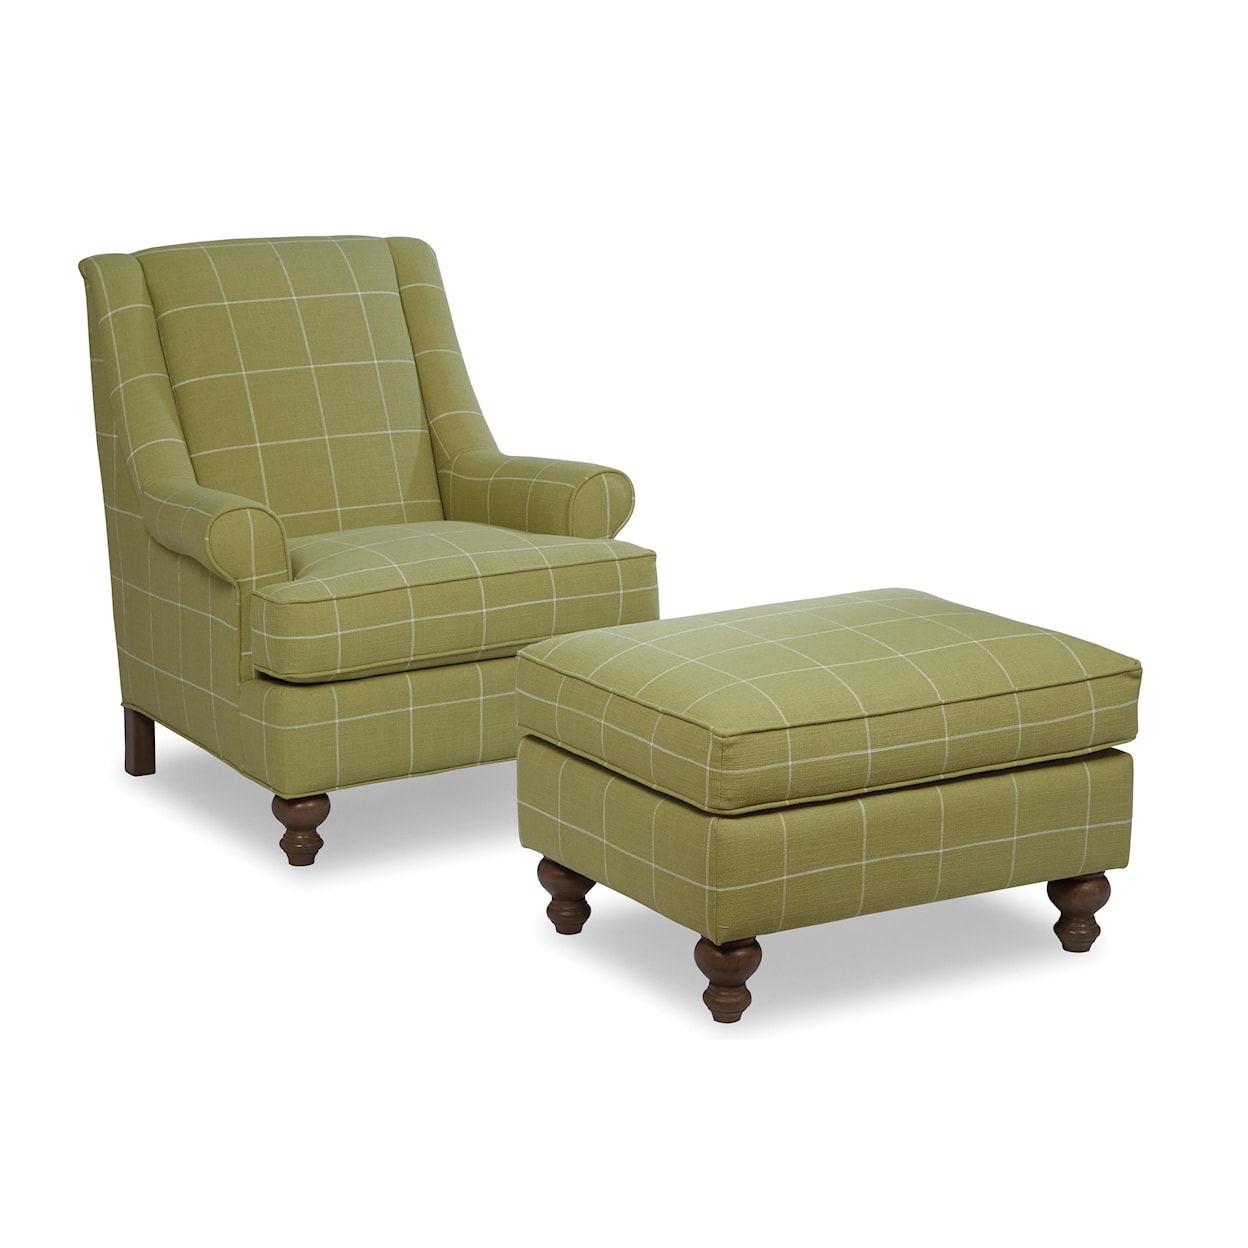 Hickory Craft Upholstered Chairs Chair & Ottoman Set